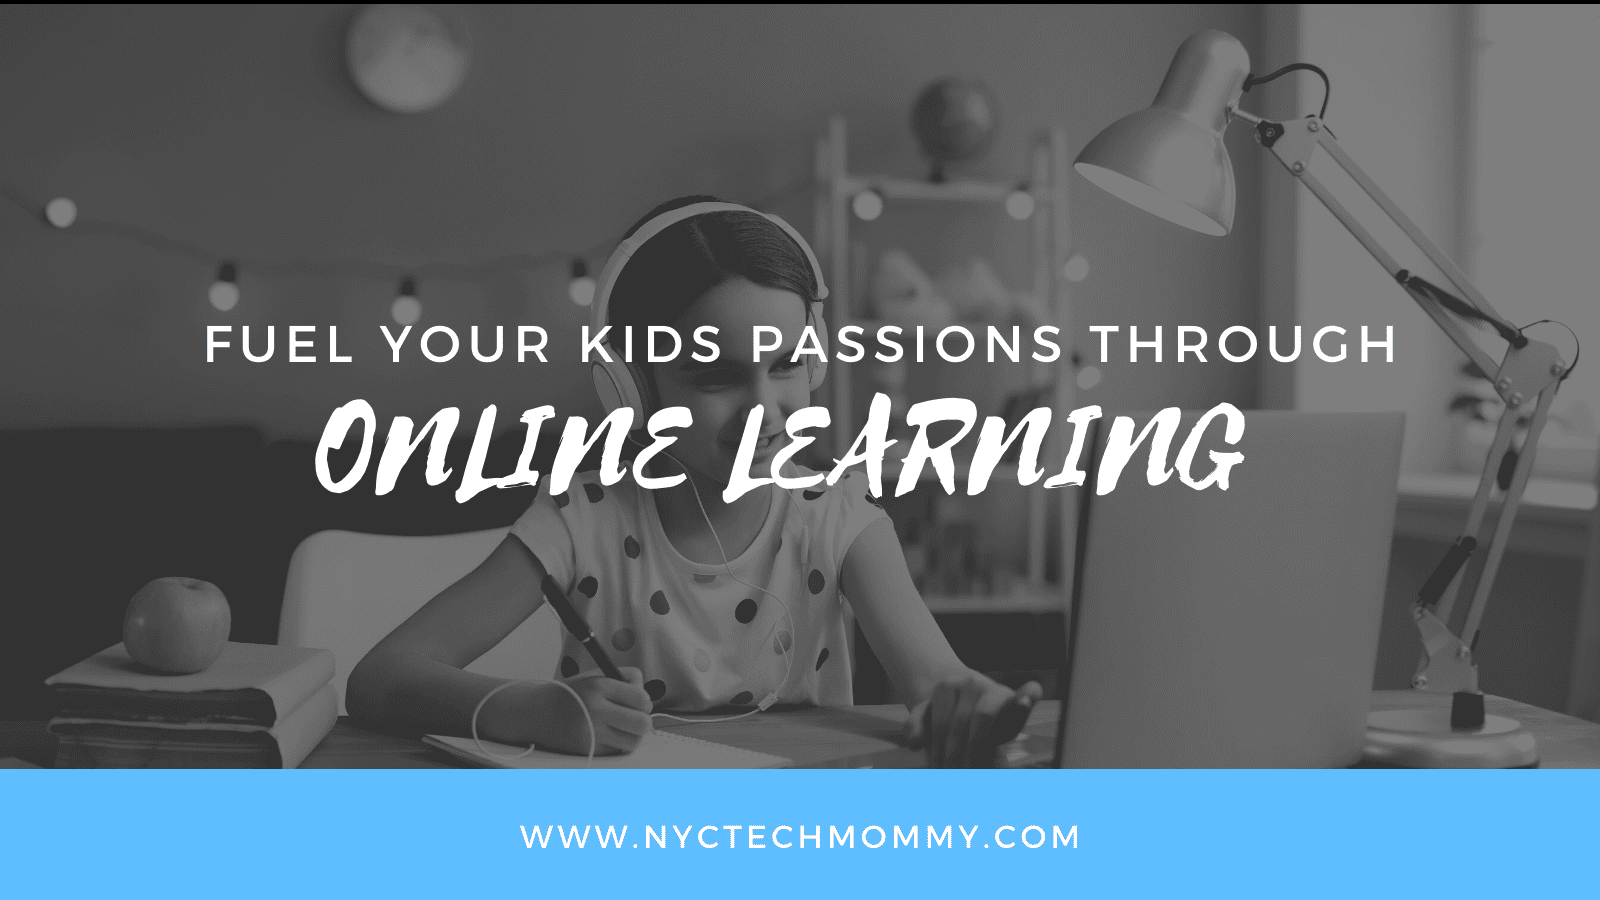 Here's how to fuel your kid's passions through online learning...